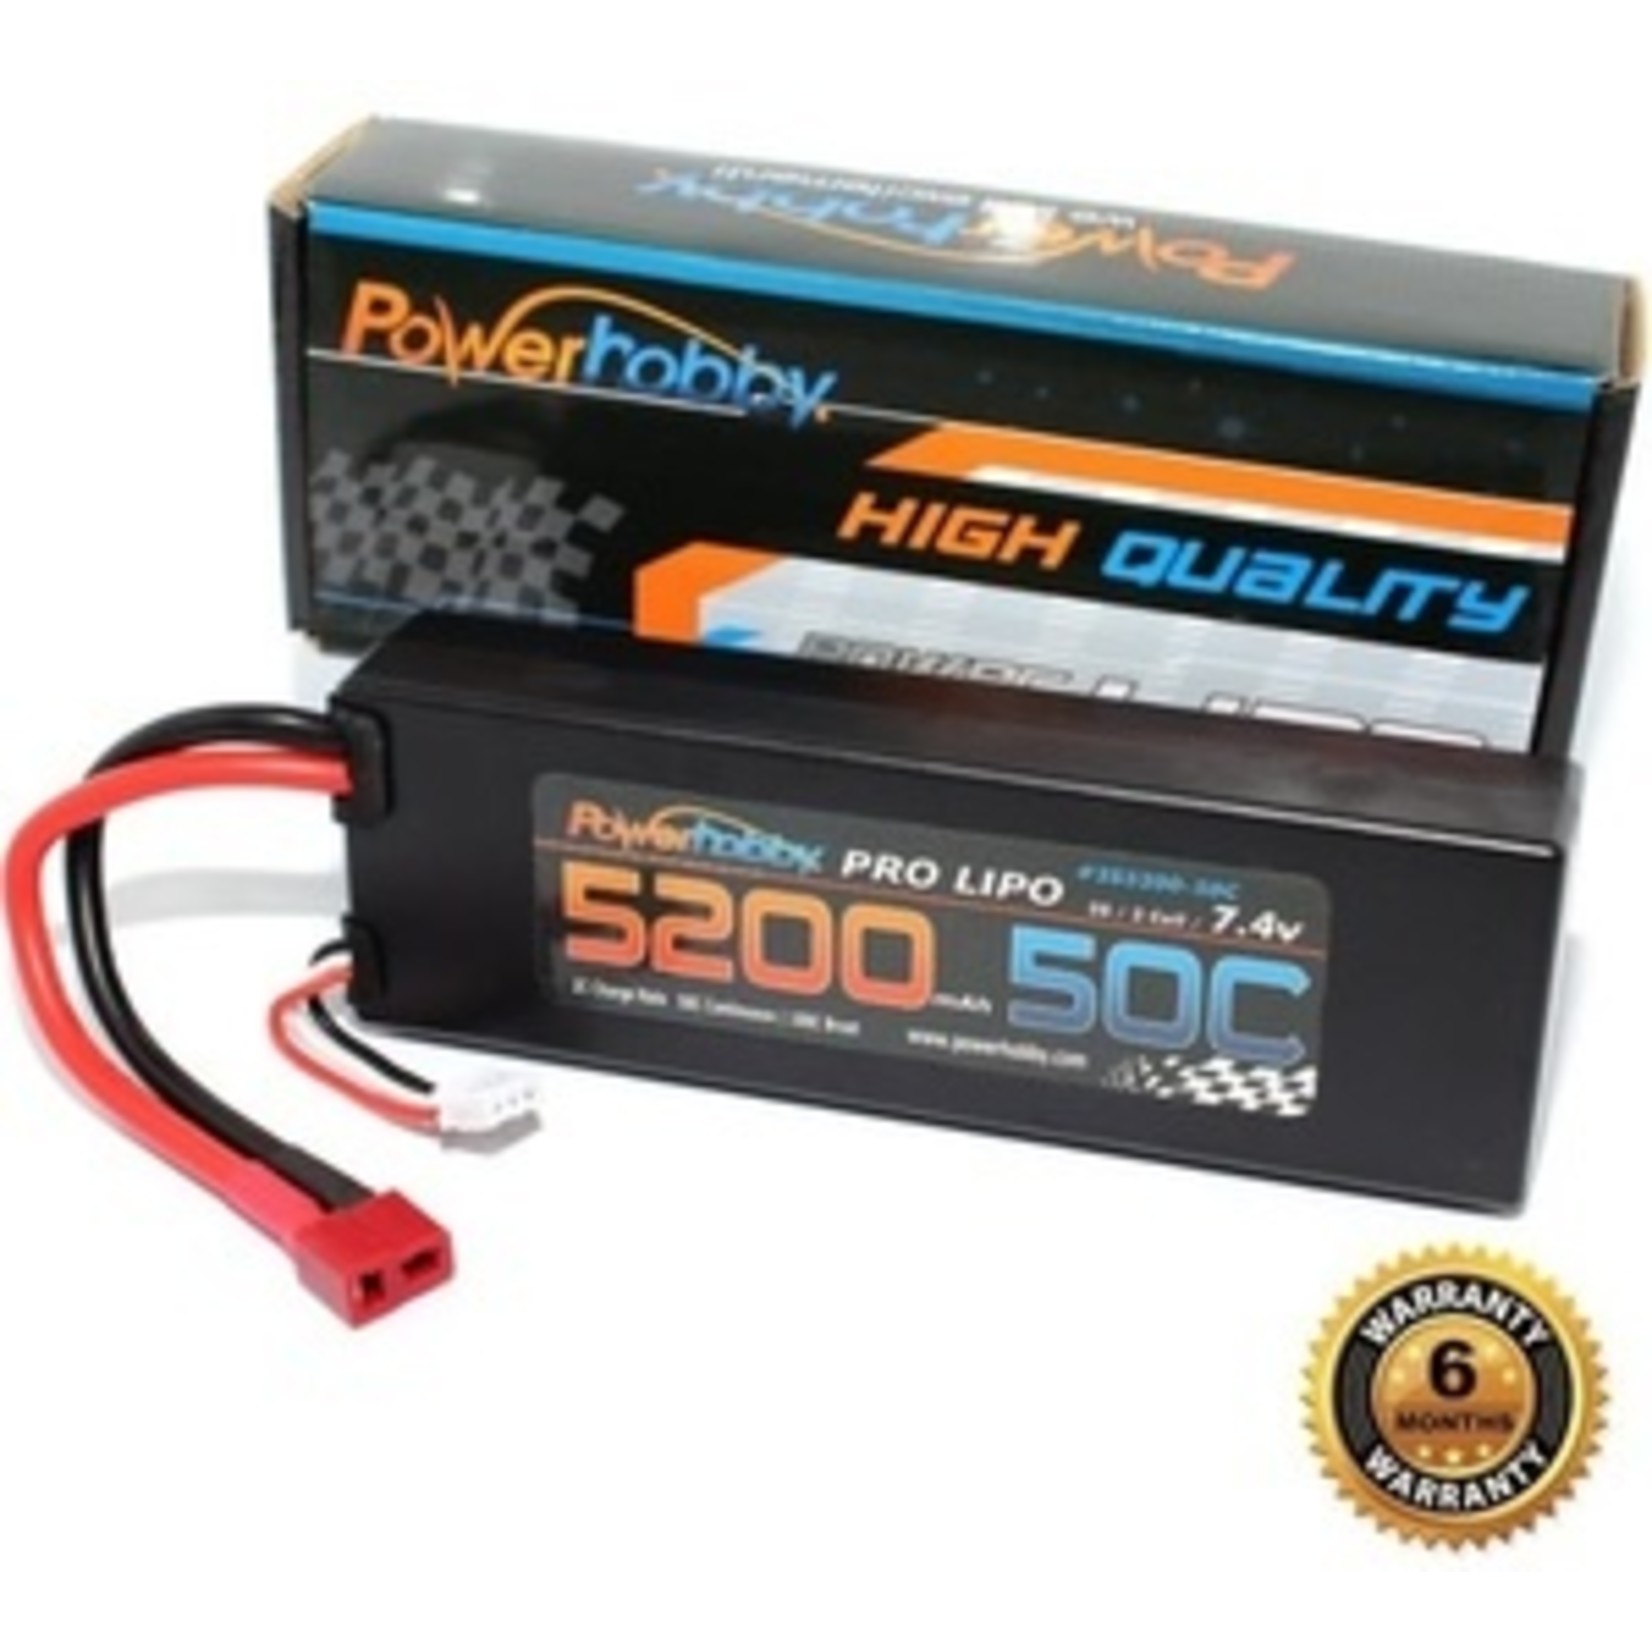 Power Hobby 5200mAh 7.4V 2S 50C LiPo Battery with Hardwired T-Plug Connector